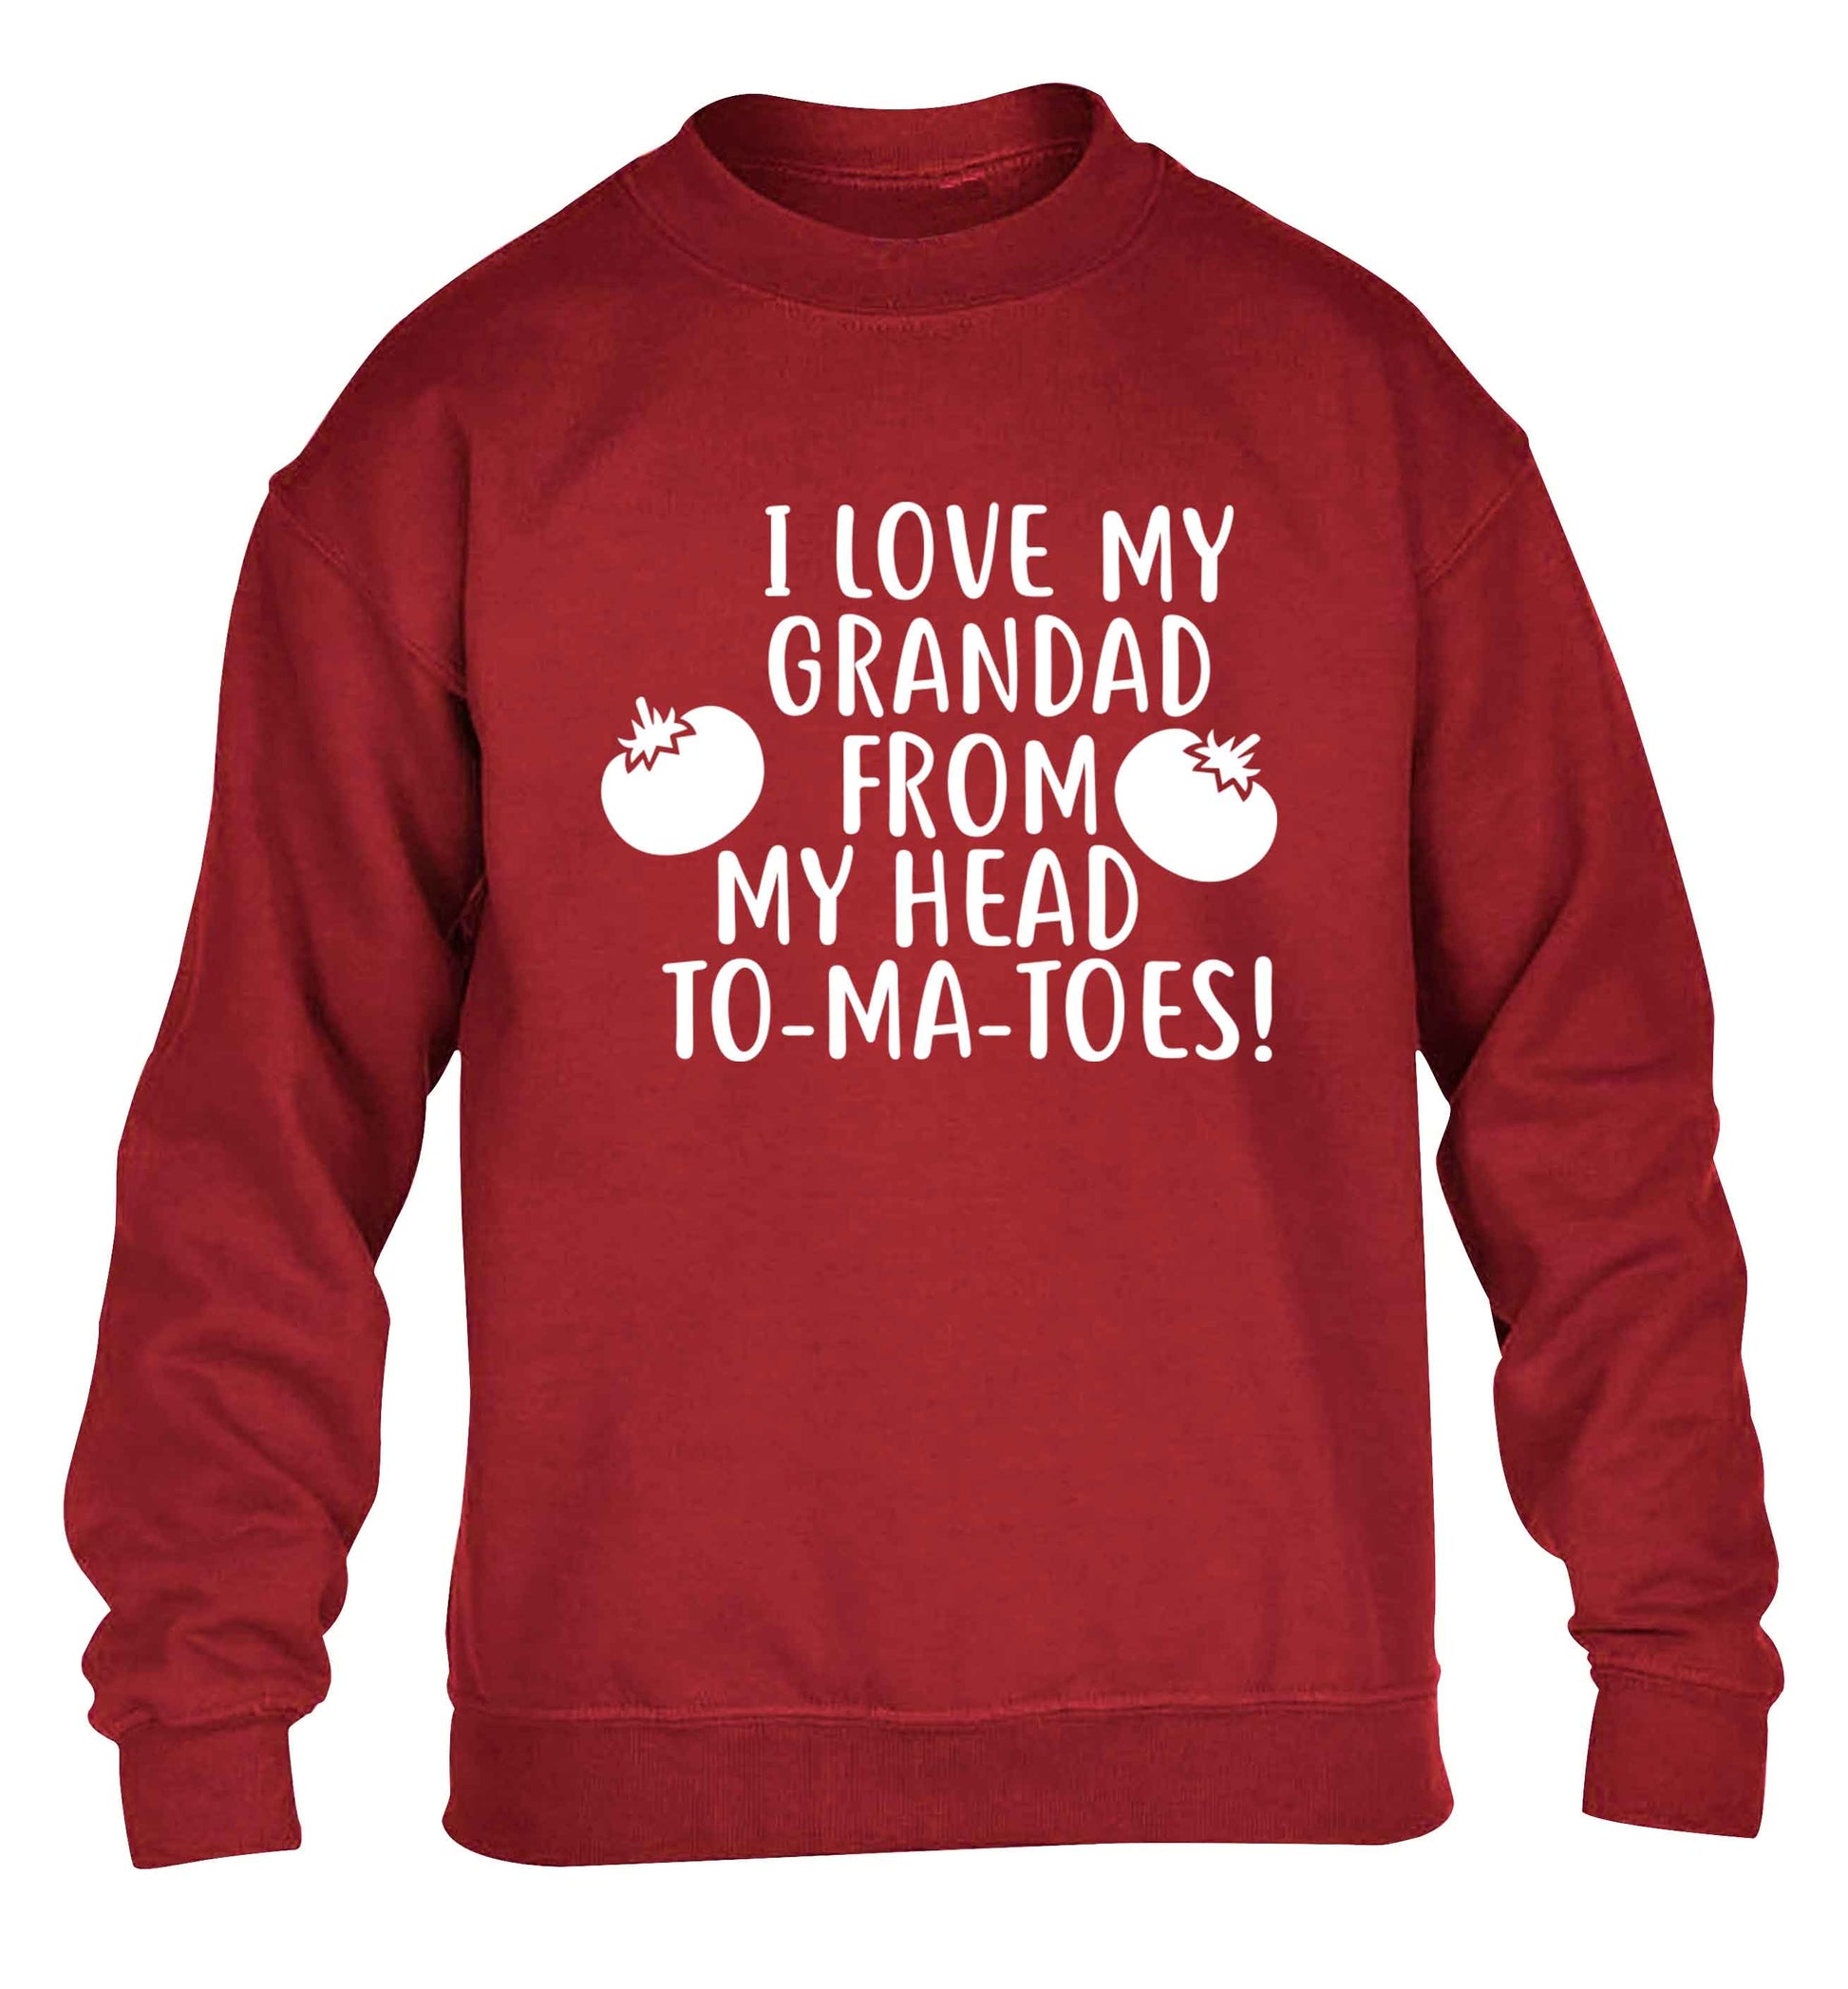 I love my grandad from my head To-Ma-Toes children's grey sweater 12-13 Years